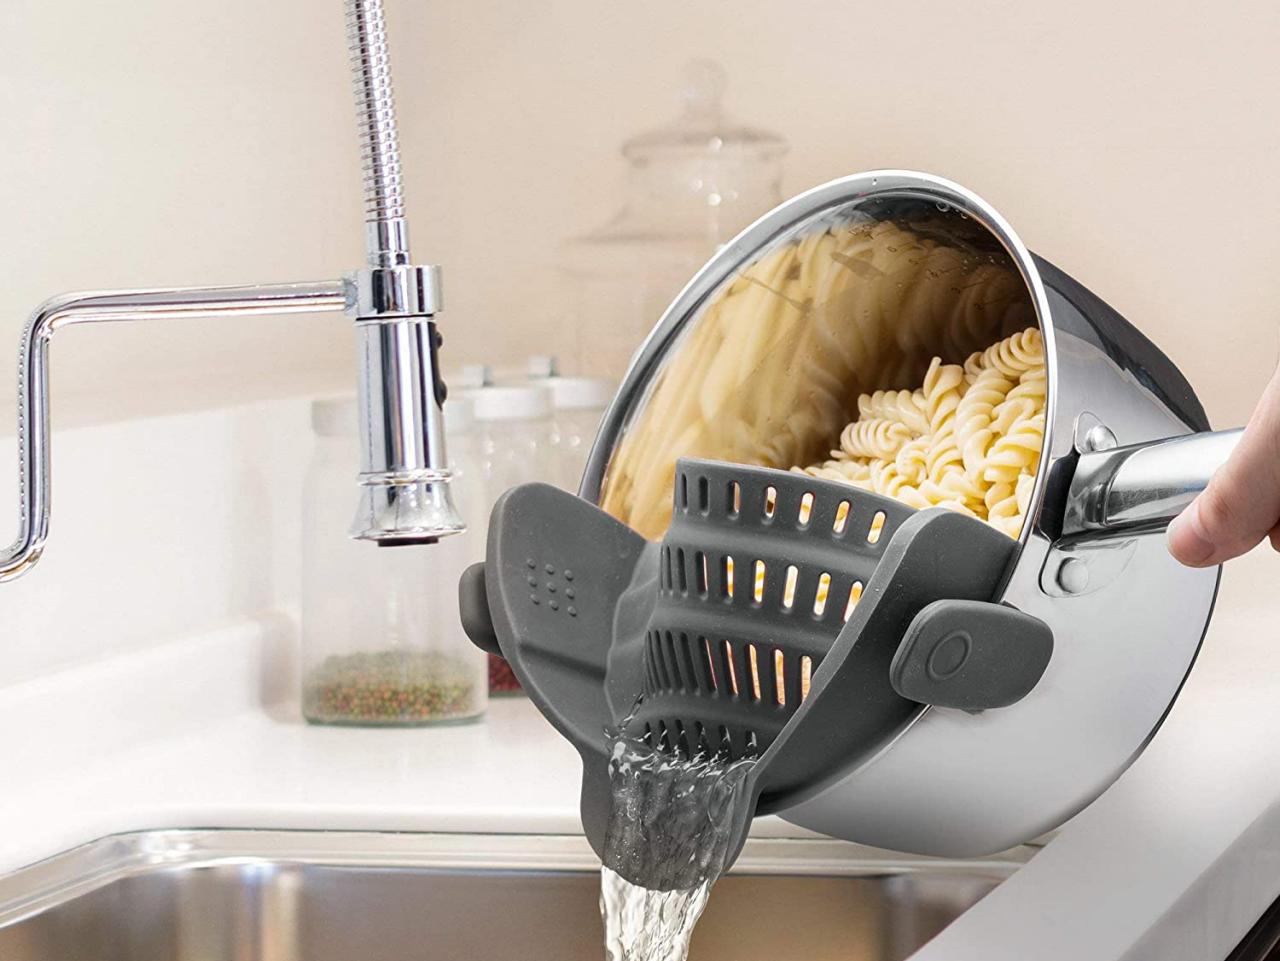 https://hgtvhome.sndimg.com/content/dam/images/hgtv/products/2021/2/9/rx_amazon_snap-n-strain-clip-on-silicone-colander.jpeg.rend.hgtvcom.1280.960.suffix/1612887646485.jpeg